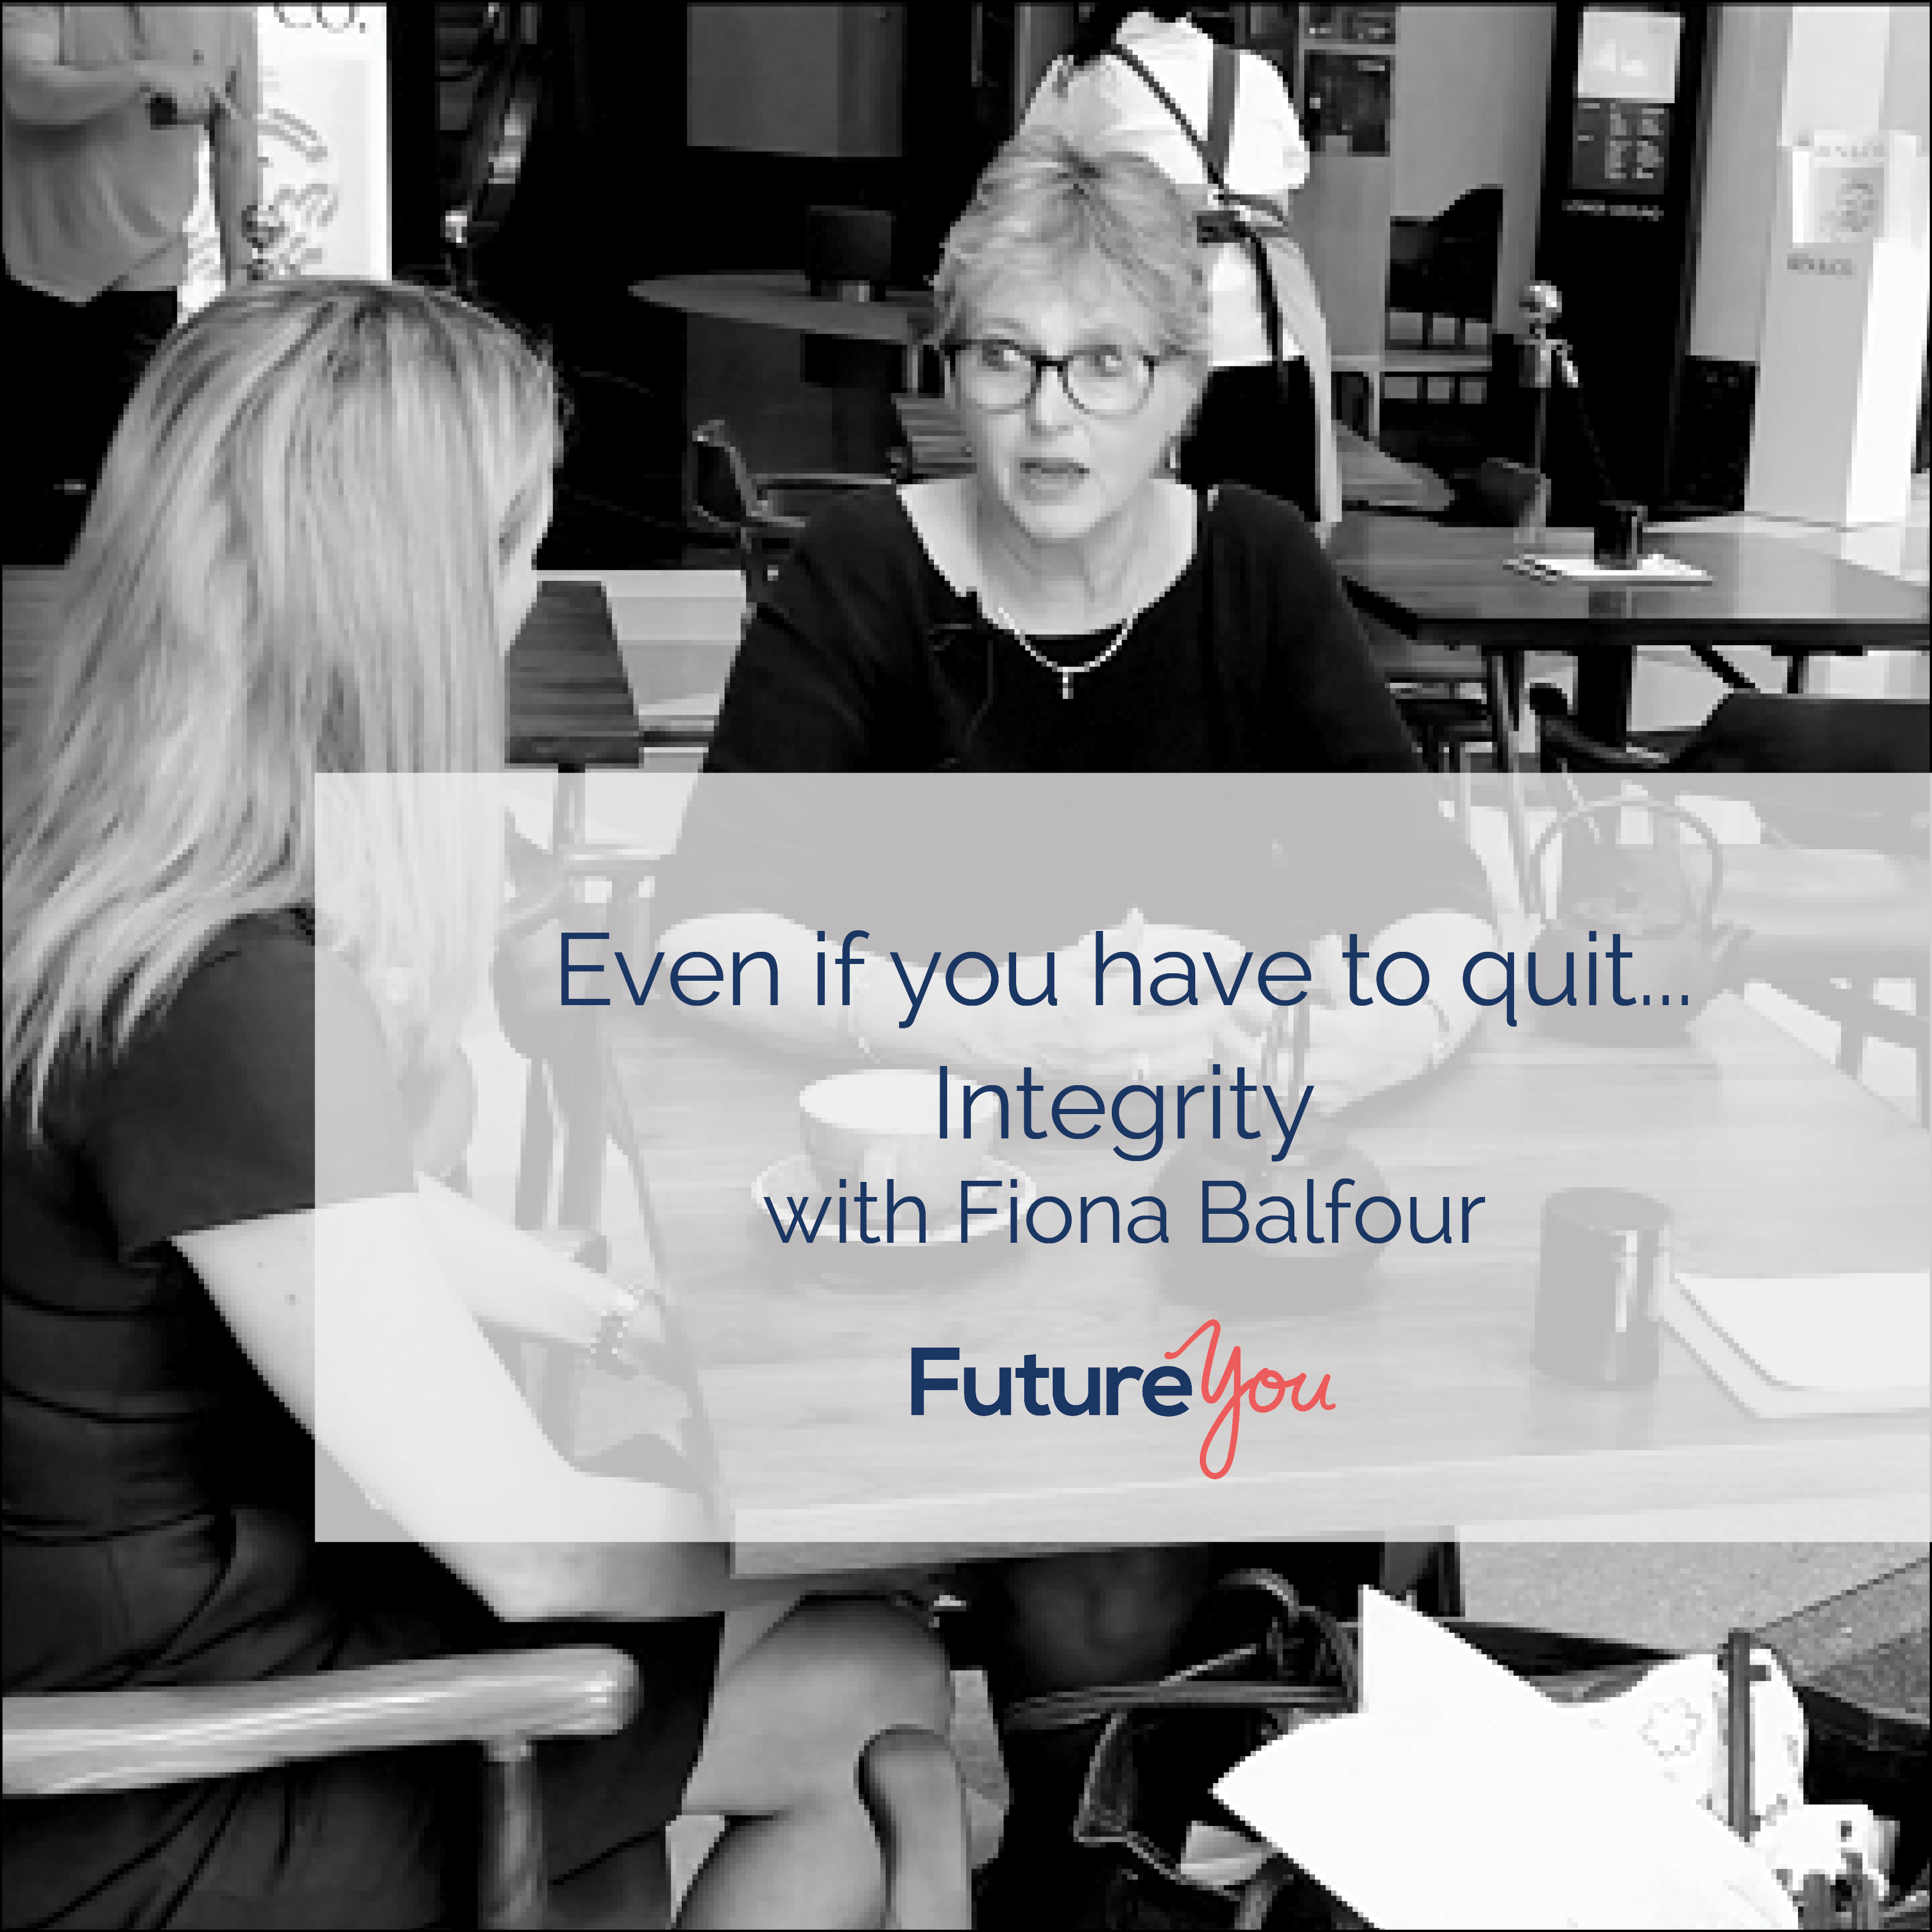 FutureYou Recruitment Even if you have to quit... Integrity, with Fiona Balfour P4